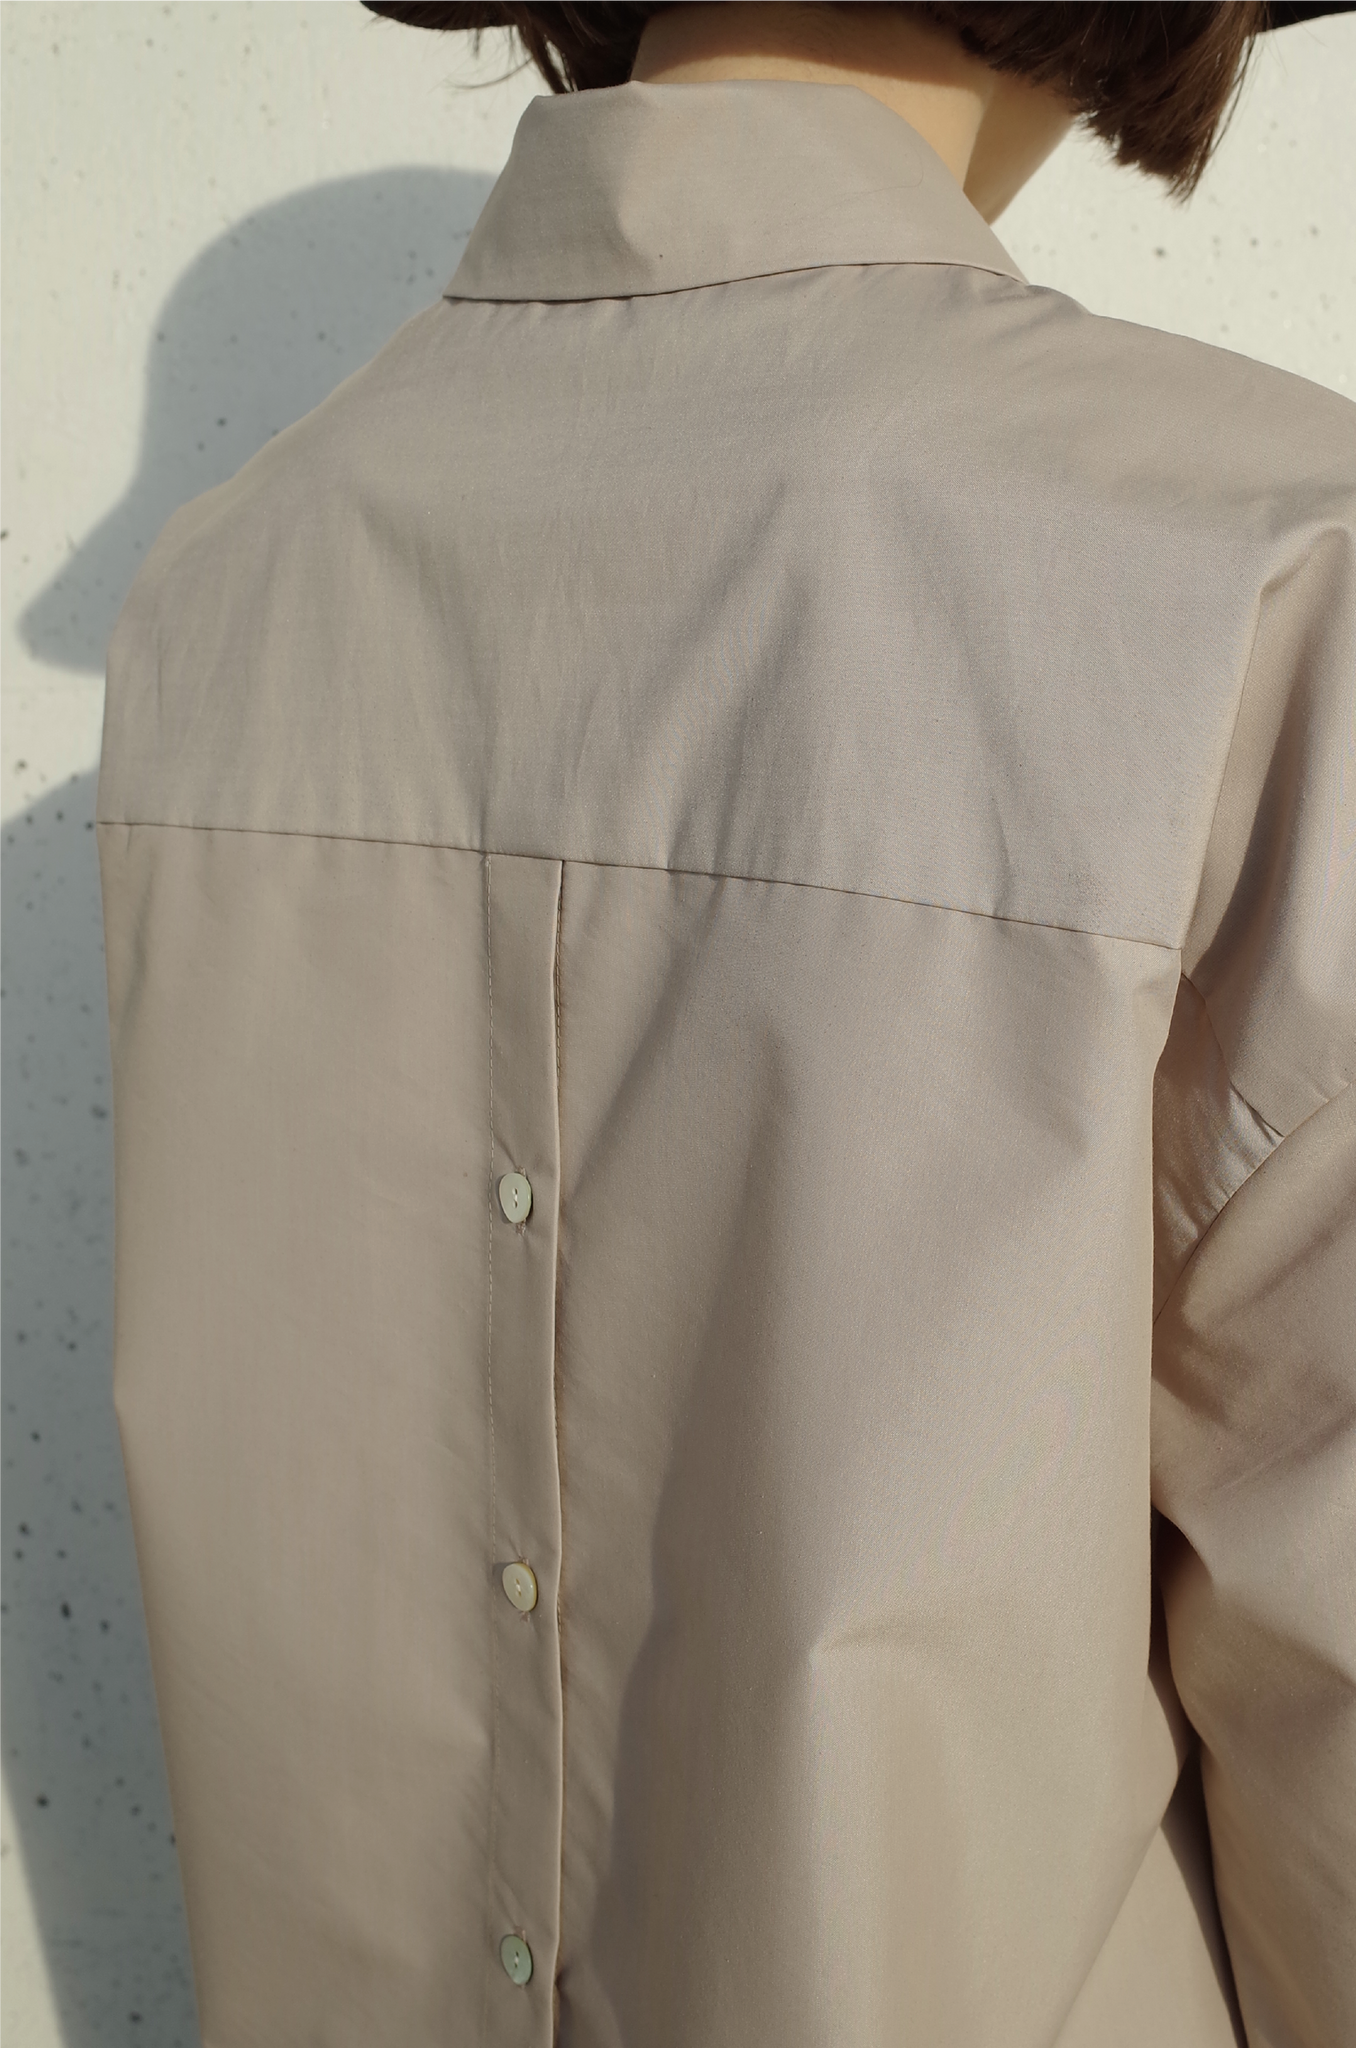 ・ Reserved items ・ Shell Button Elegant Shirt